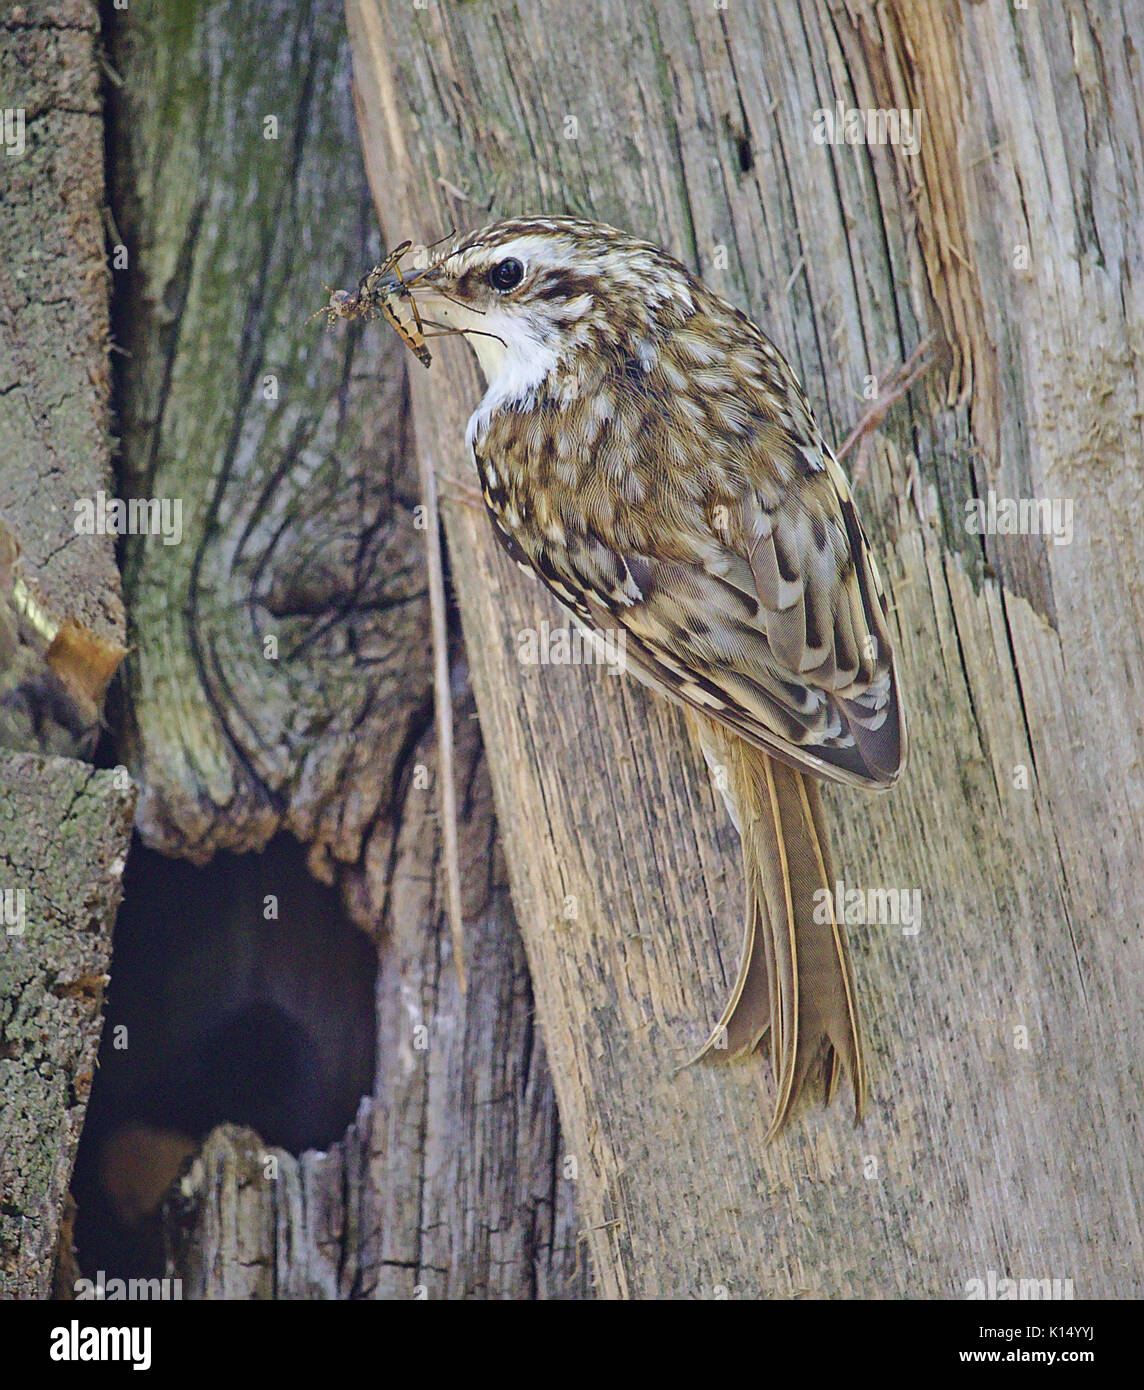 Short-toed treecreeper with insect in its beak perched on a wooden shed beside its nesting cavity Stock Photo